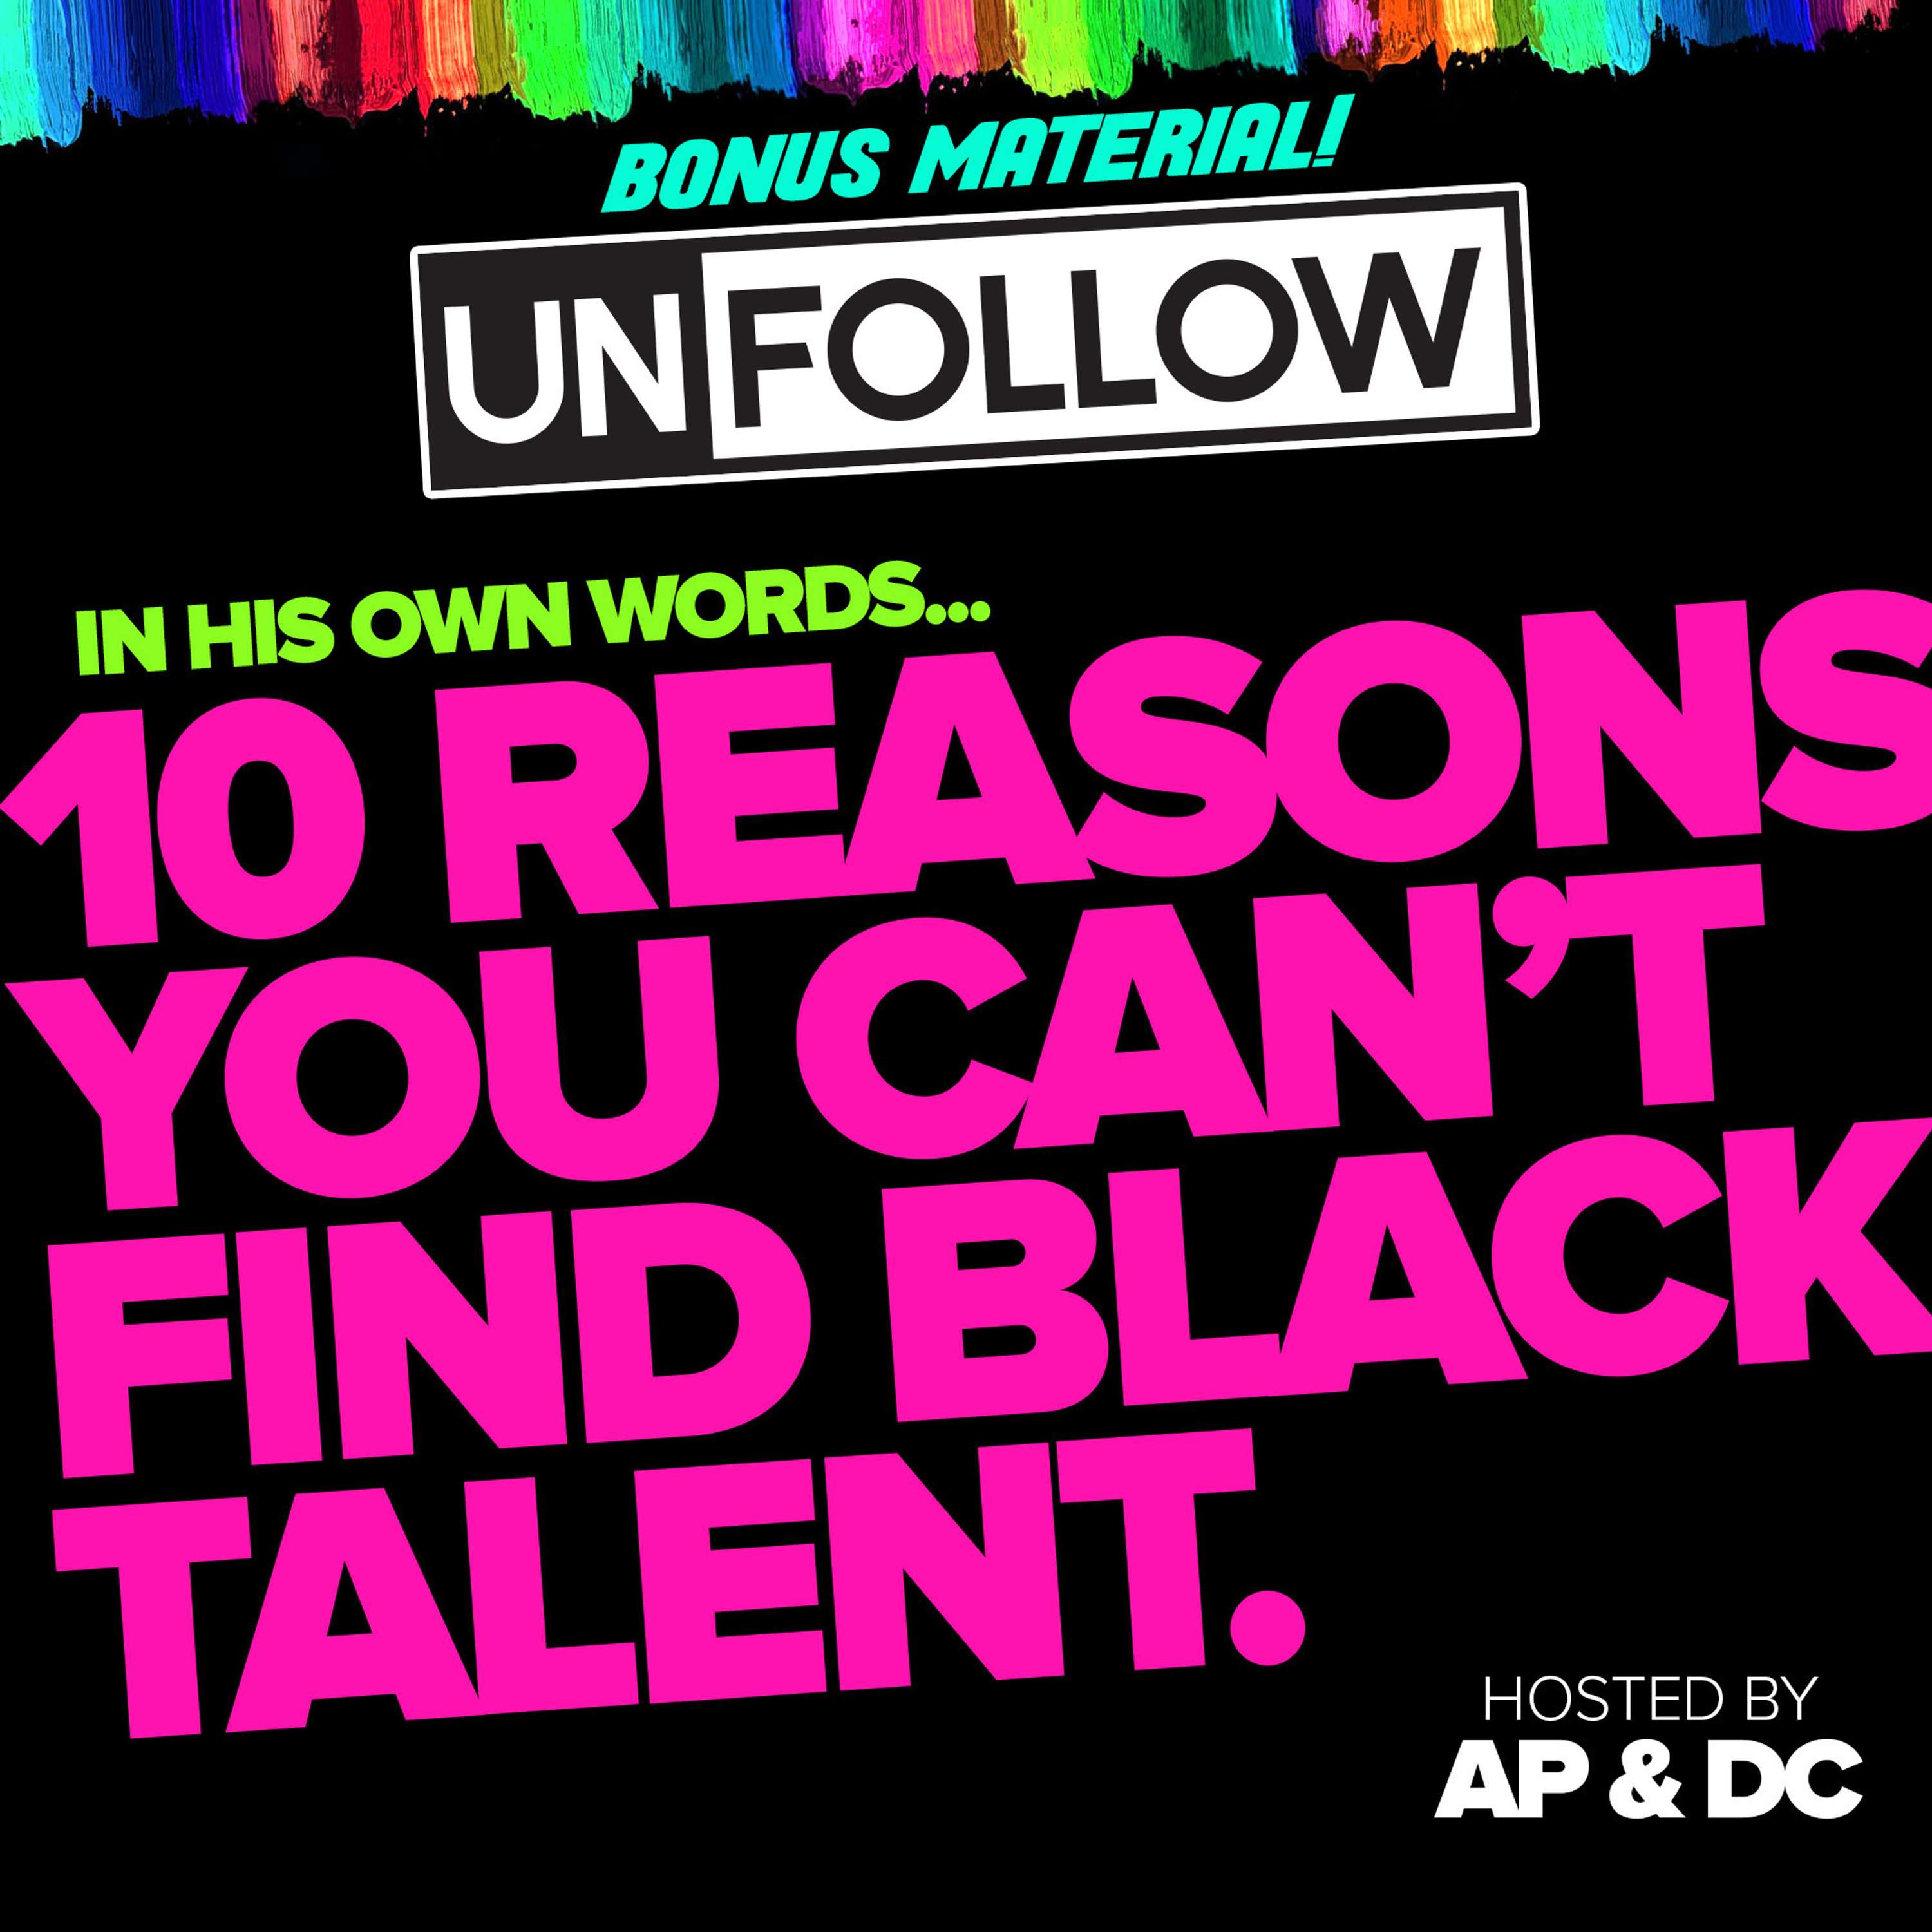 10 Reasons You Can't Find Black Talent - In His Own Words